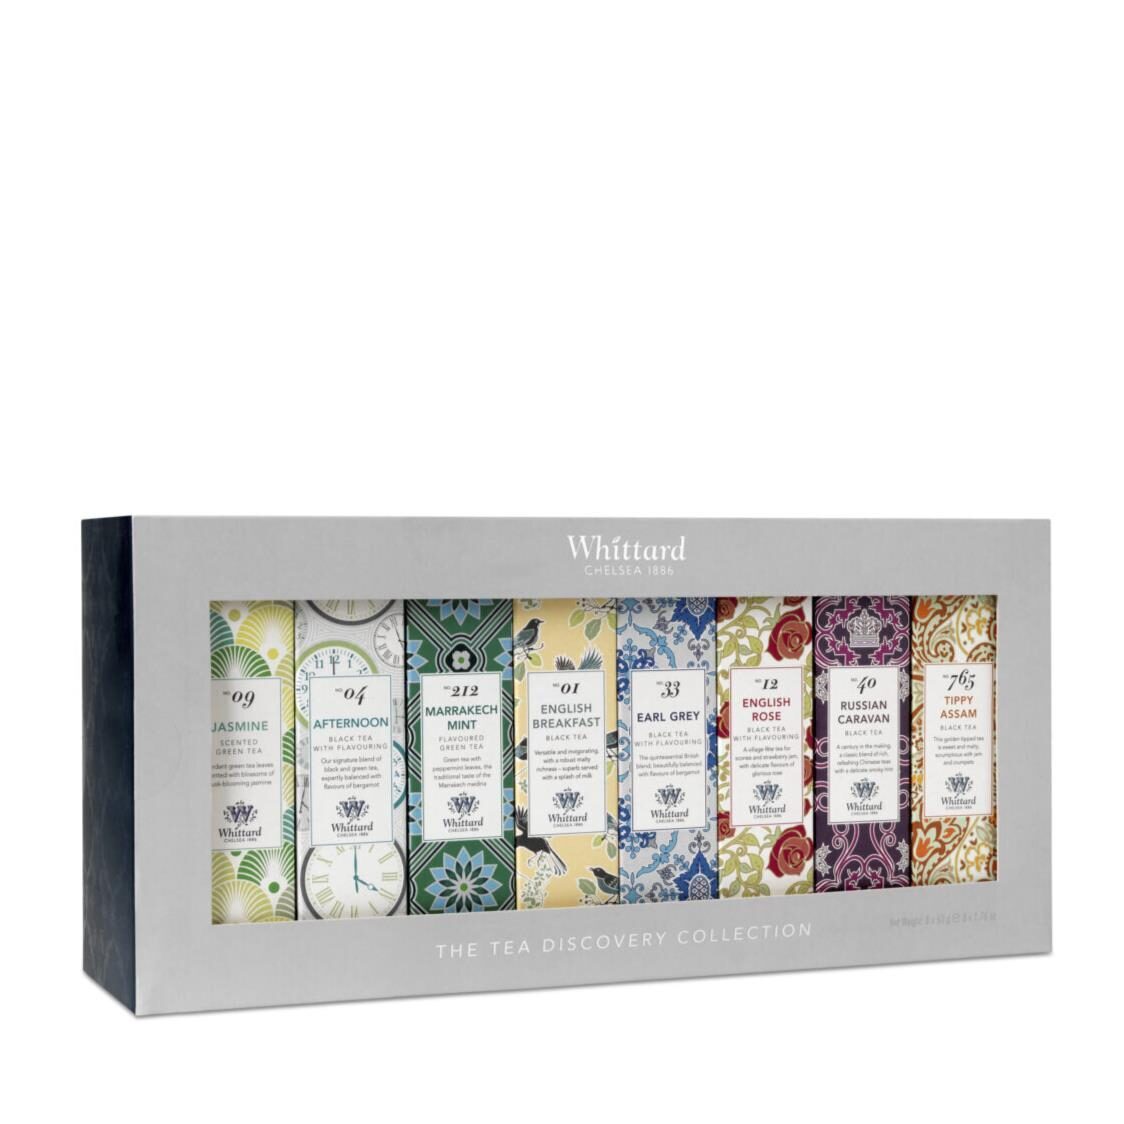 Whittard The Tea Discovery Collection 2021 8x20 teabags